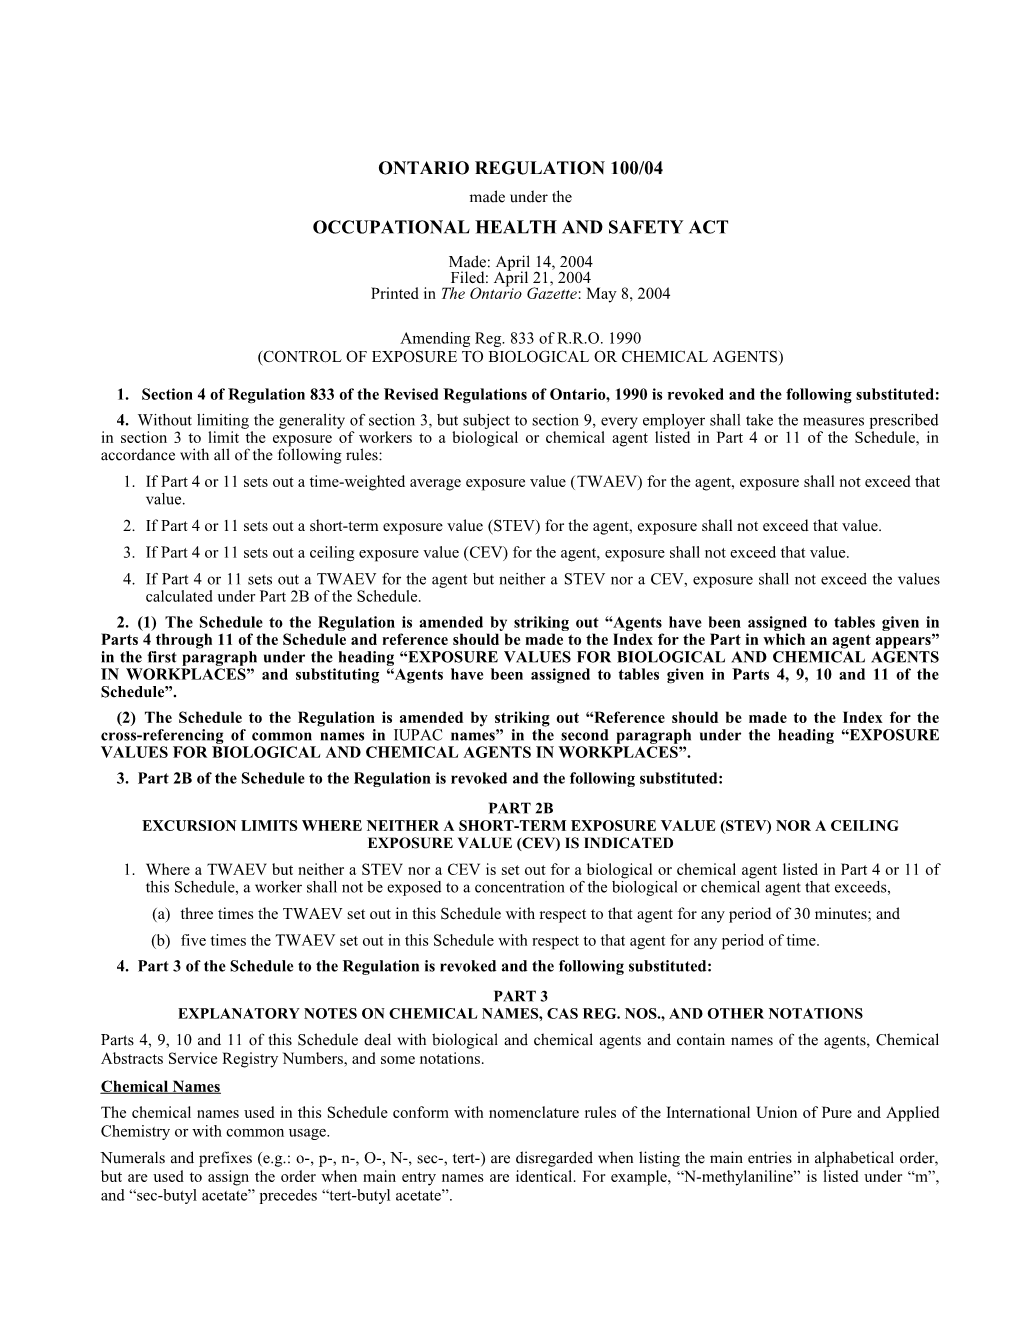 OCCUPATIONAL HEALTH and SAFETY ACT - O. Reg. 100/04